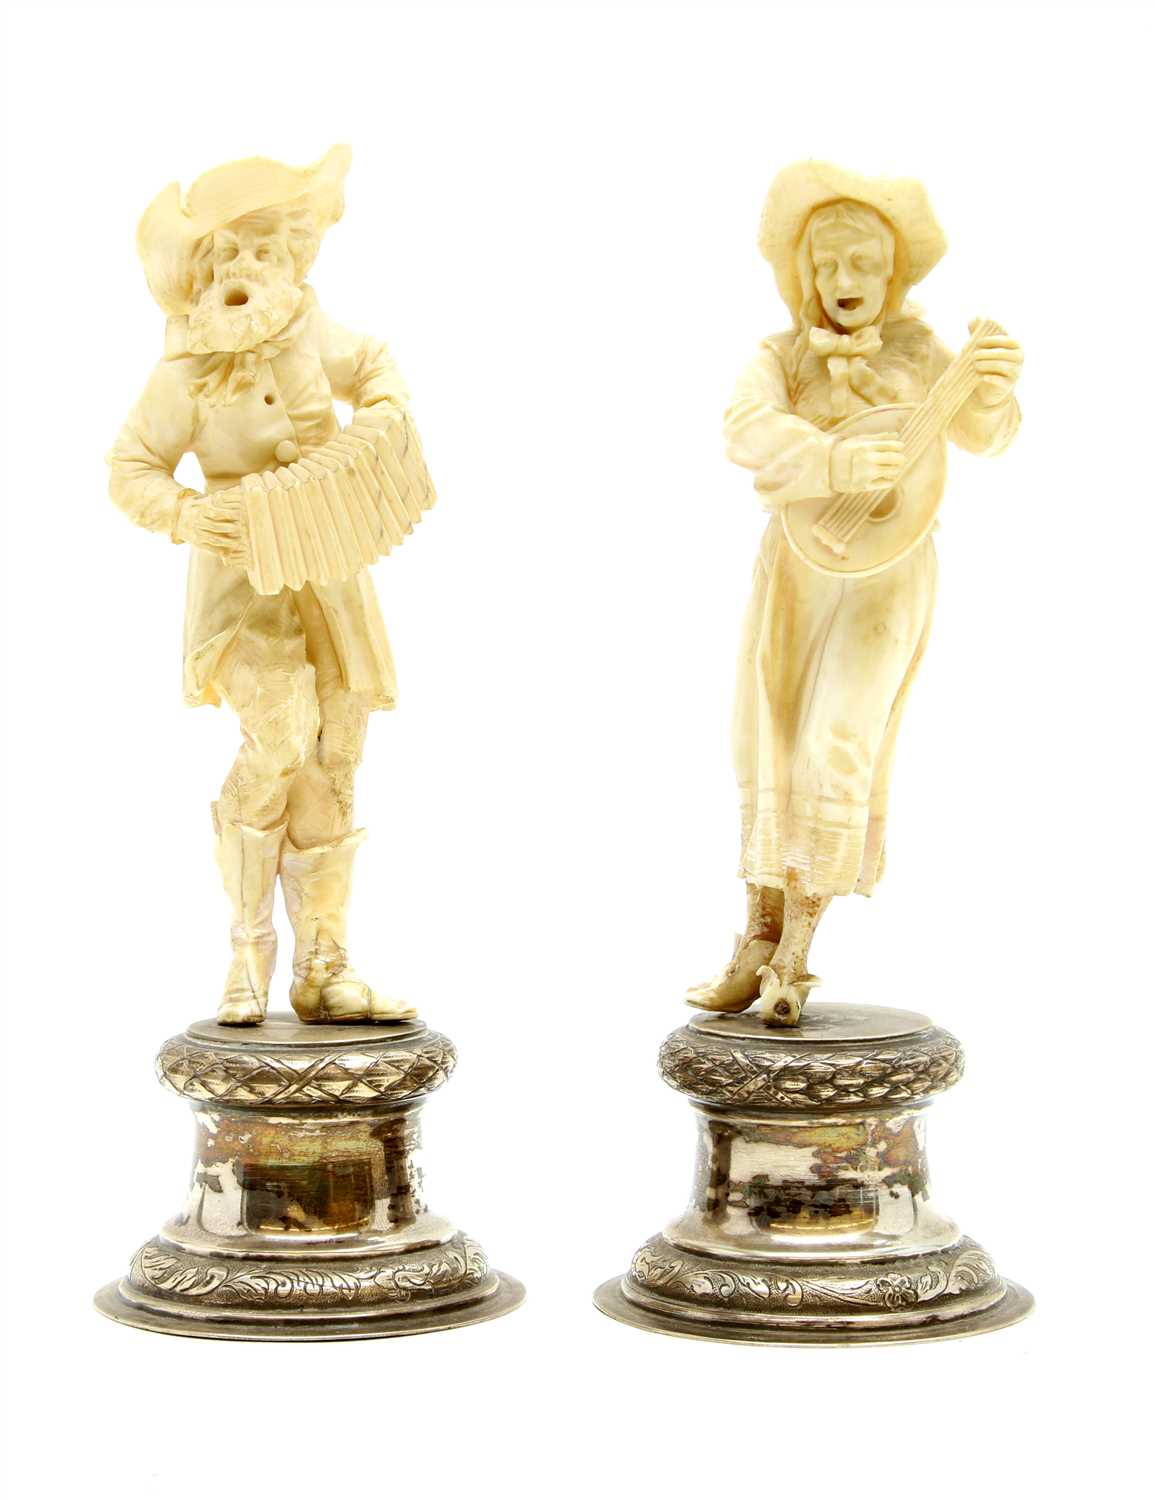 Lot 113 - A pair of late 19th century German silver and Ivory figures